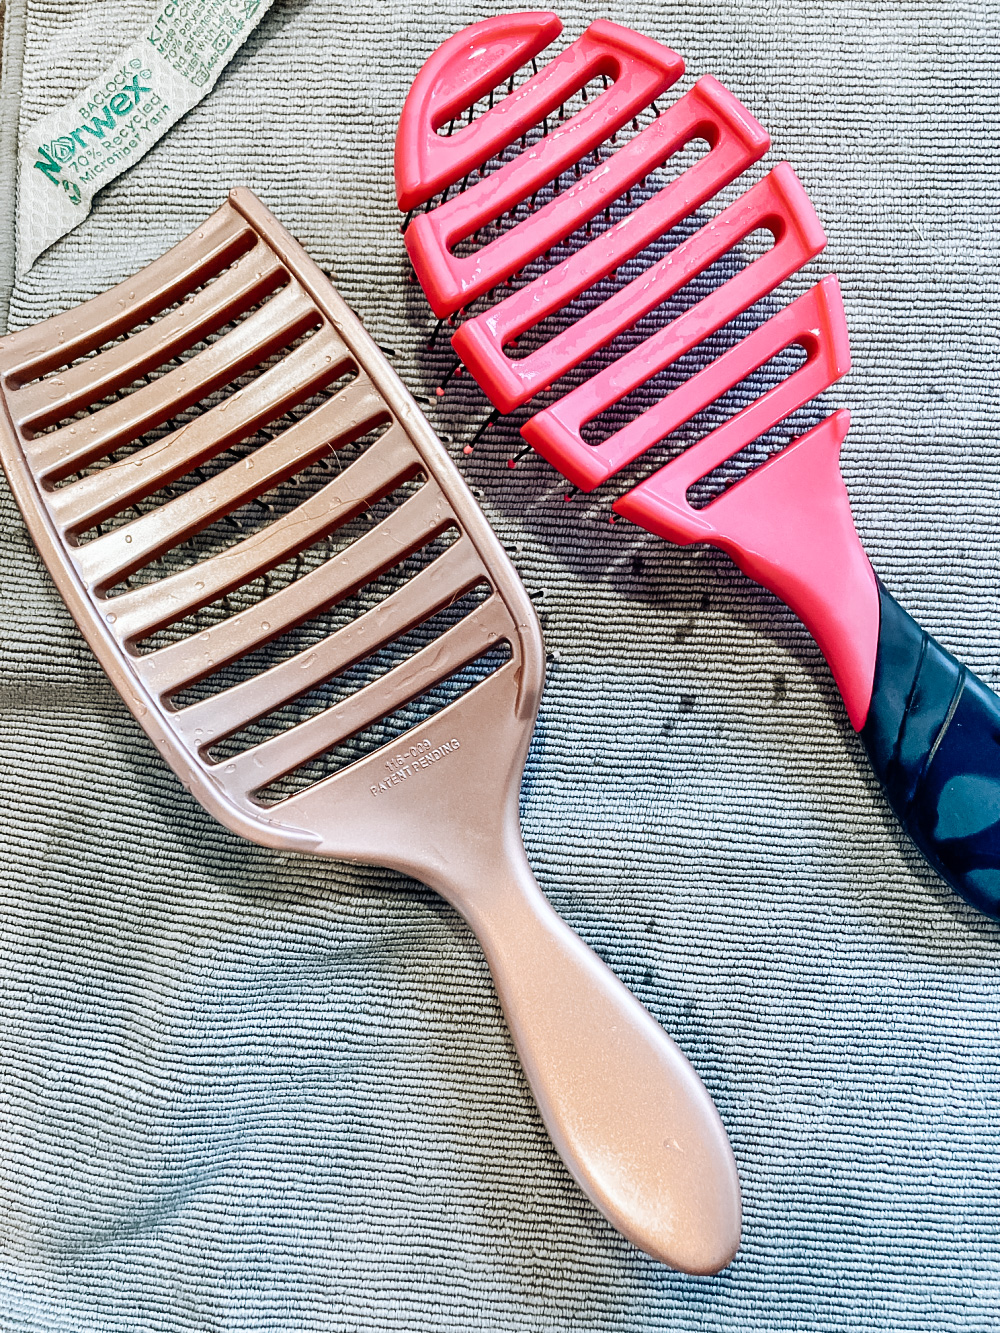 Clean your hairbrush using Norwex